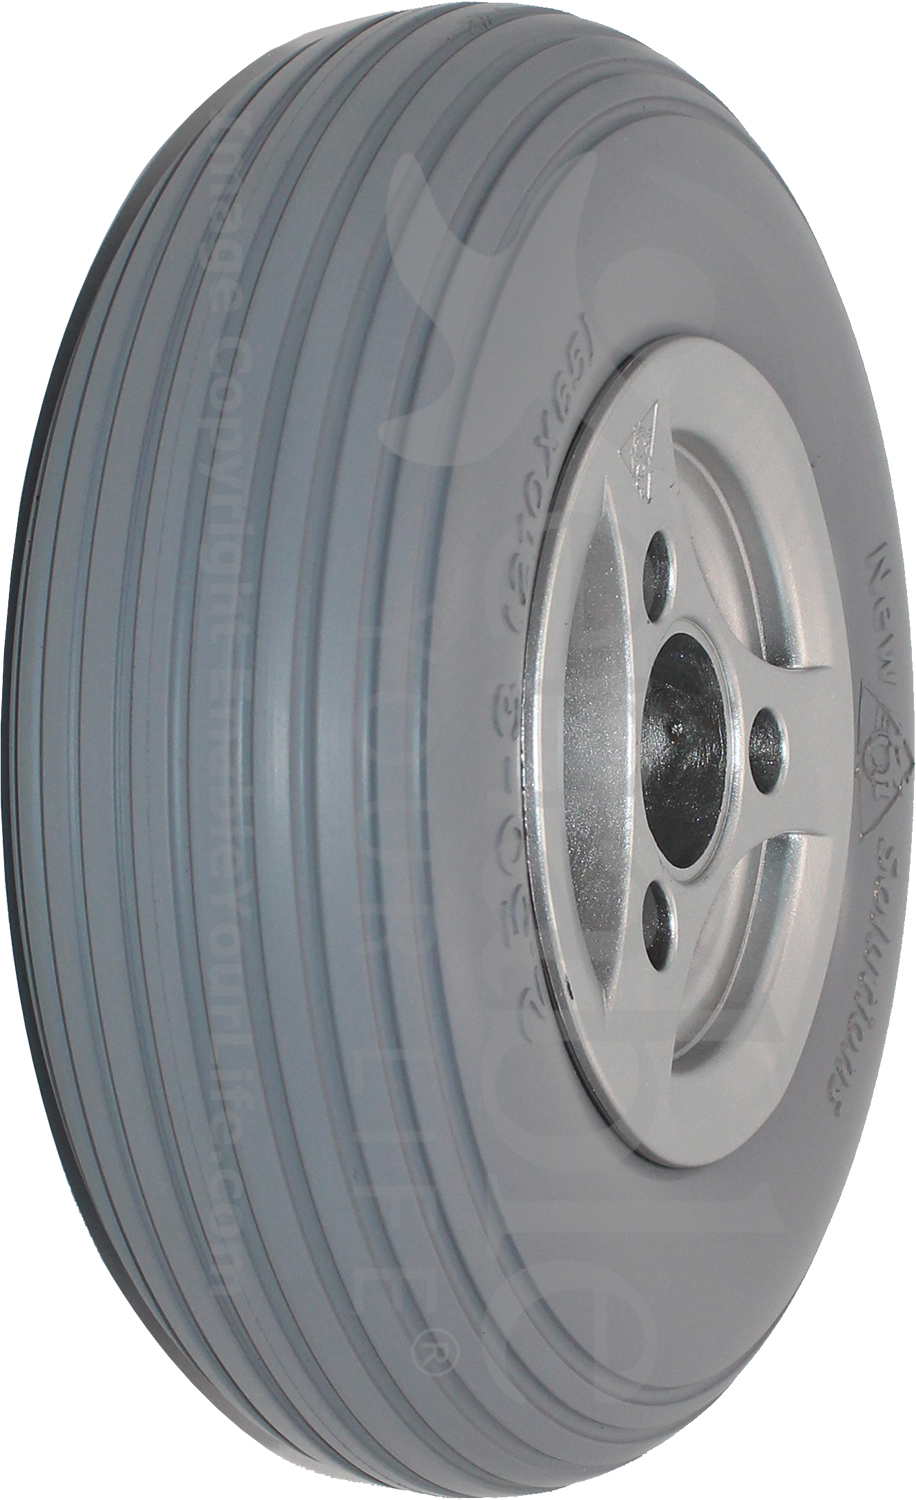 2.50-3 (210-65) Permobil C300, C350, and C500 Replacement Wheelchair Caster Wheel with Light Gray Tire (Compare to Permobil Part 1822415) - Angled view shown